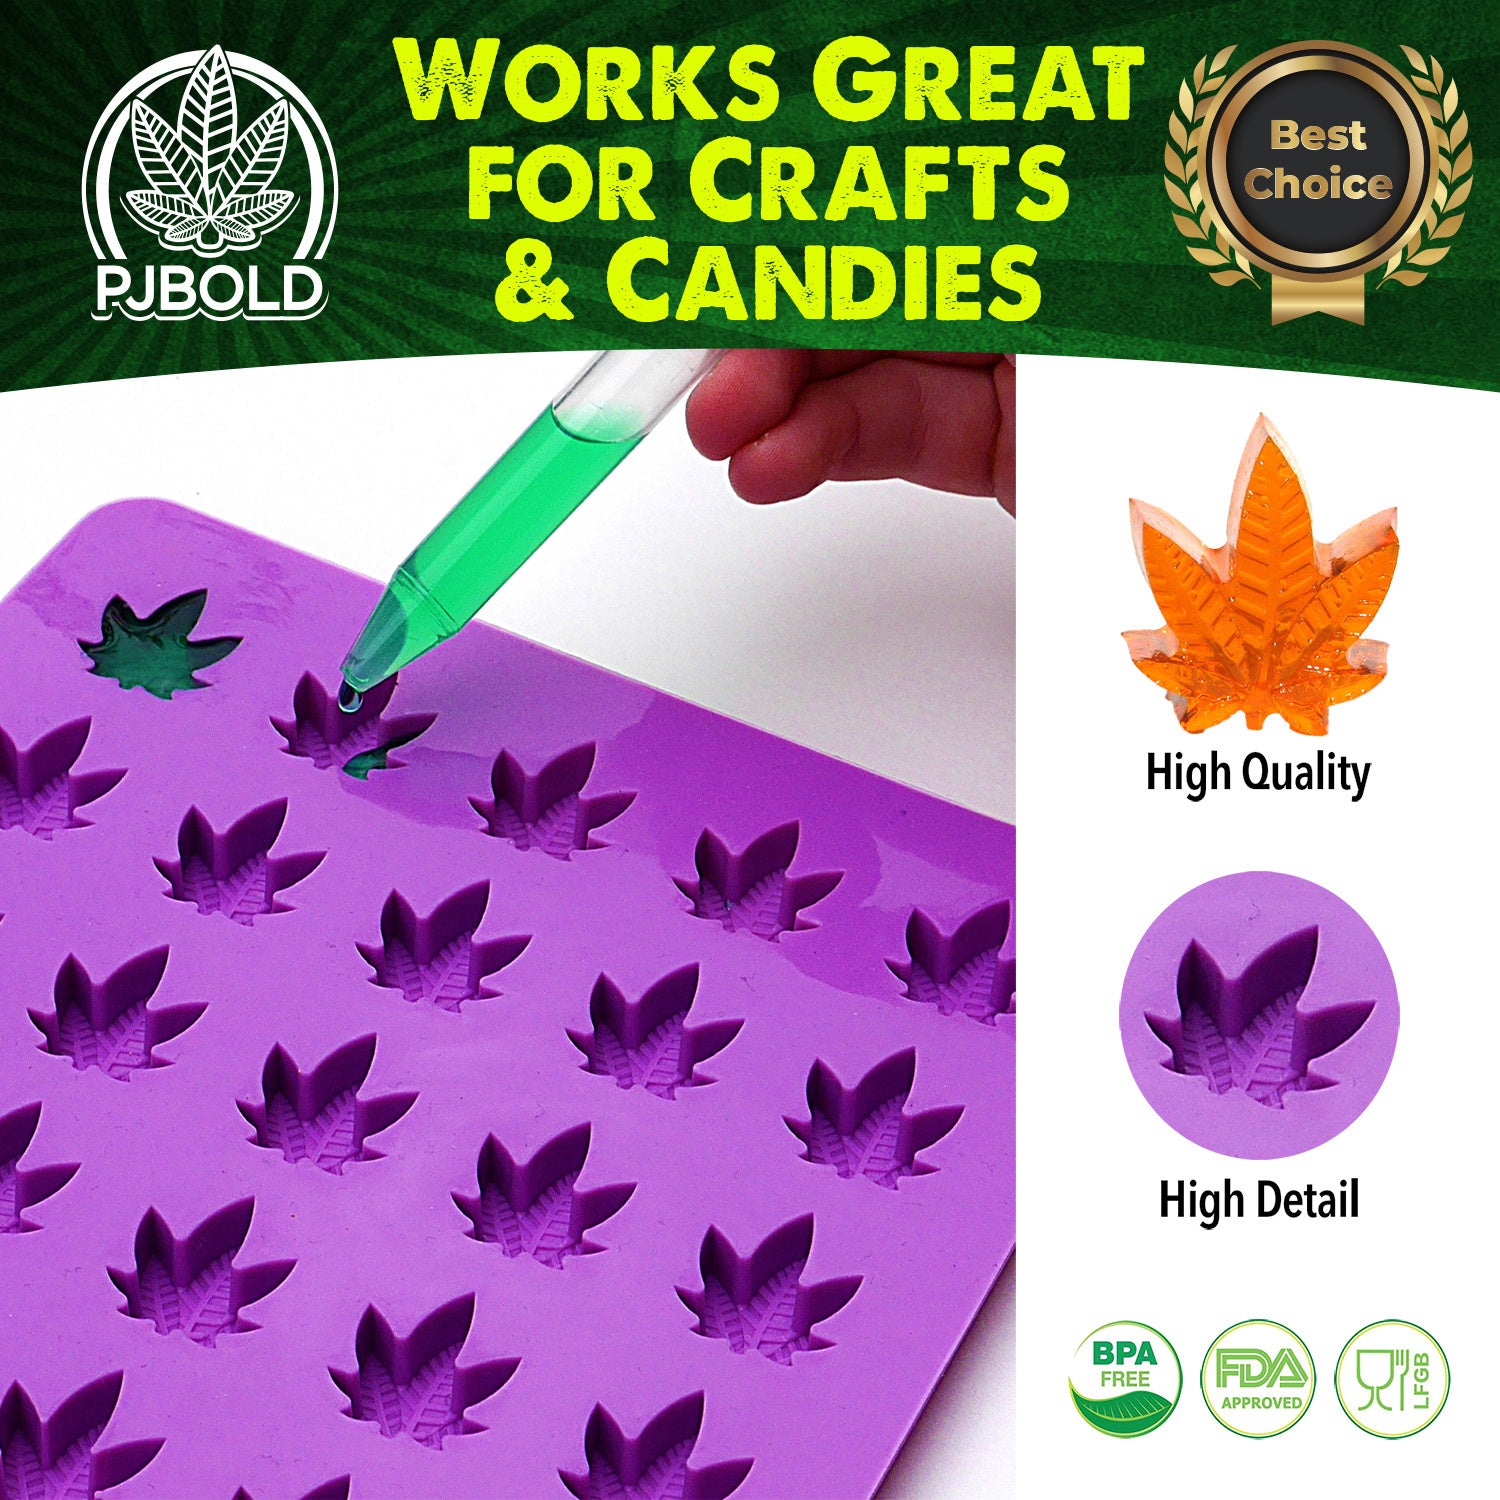 RYCORE Pot-Leaf Silicone Mold Design | Silicone Molds for Baking & Gummies | 2 Pack